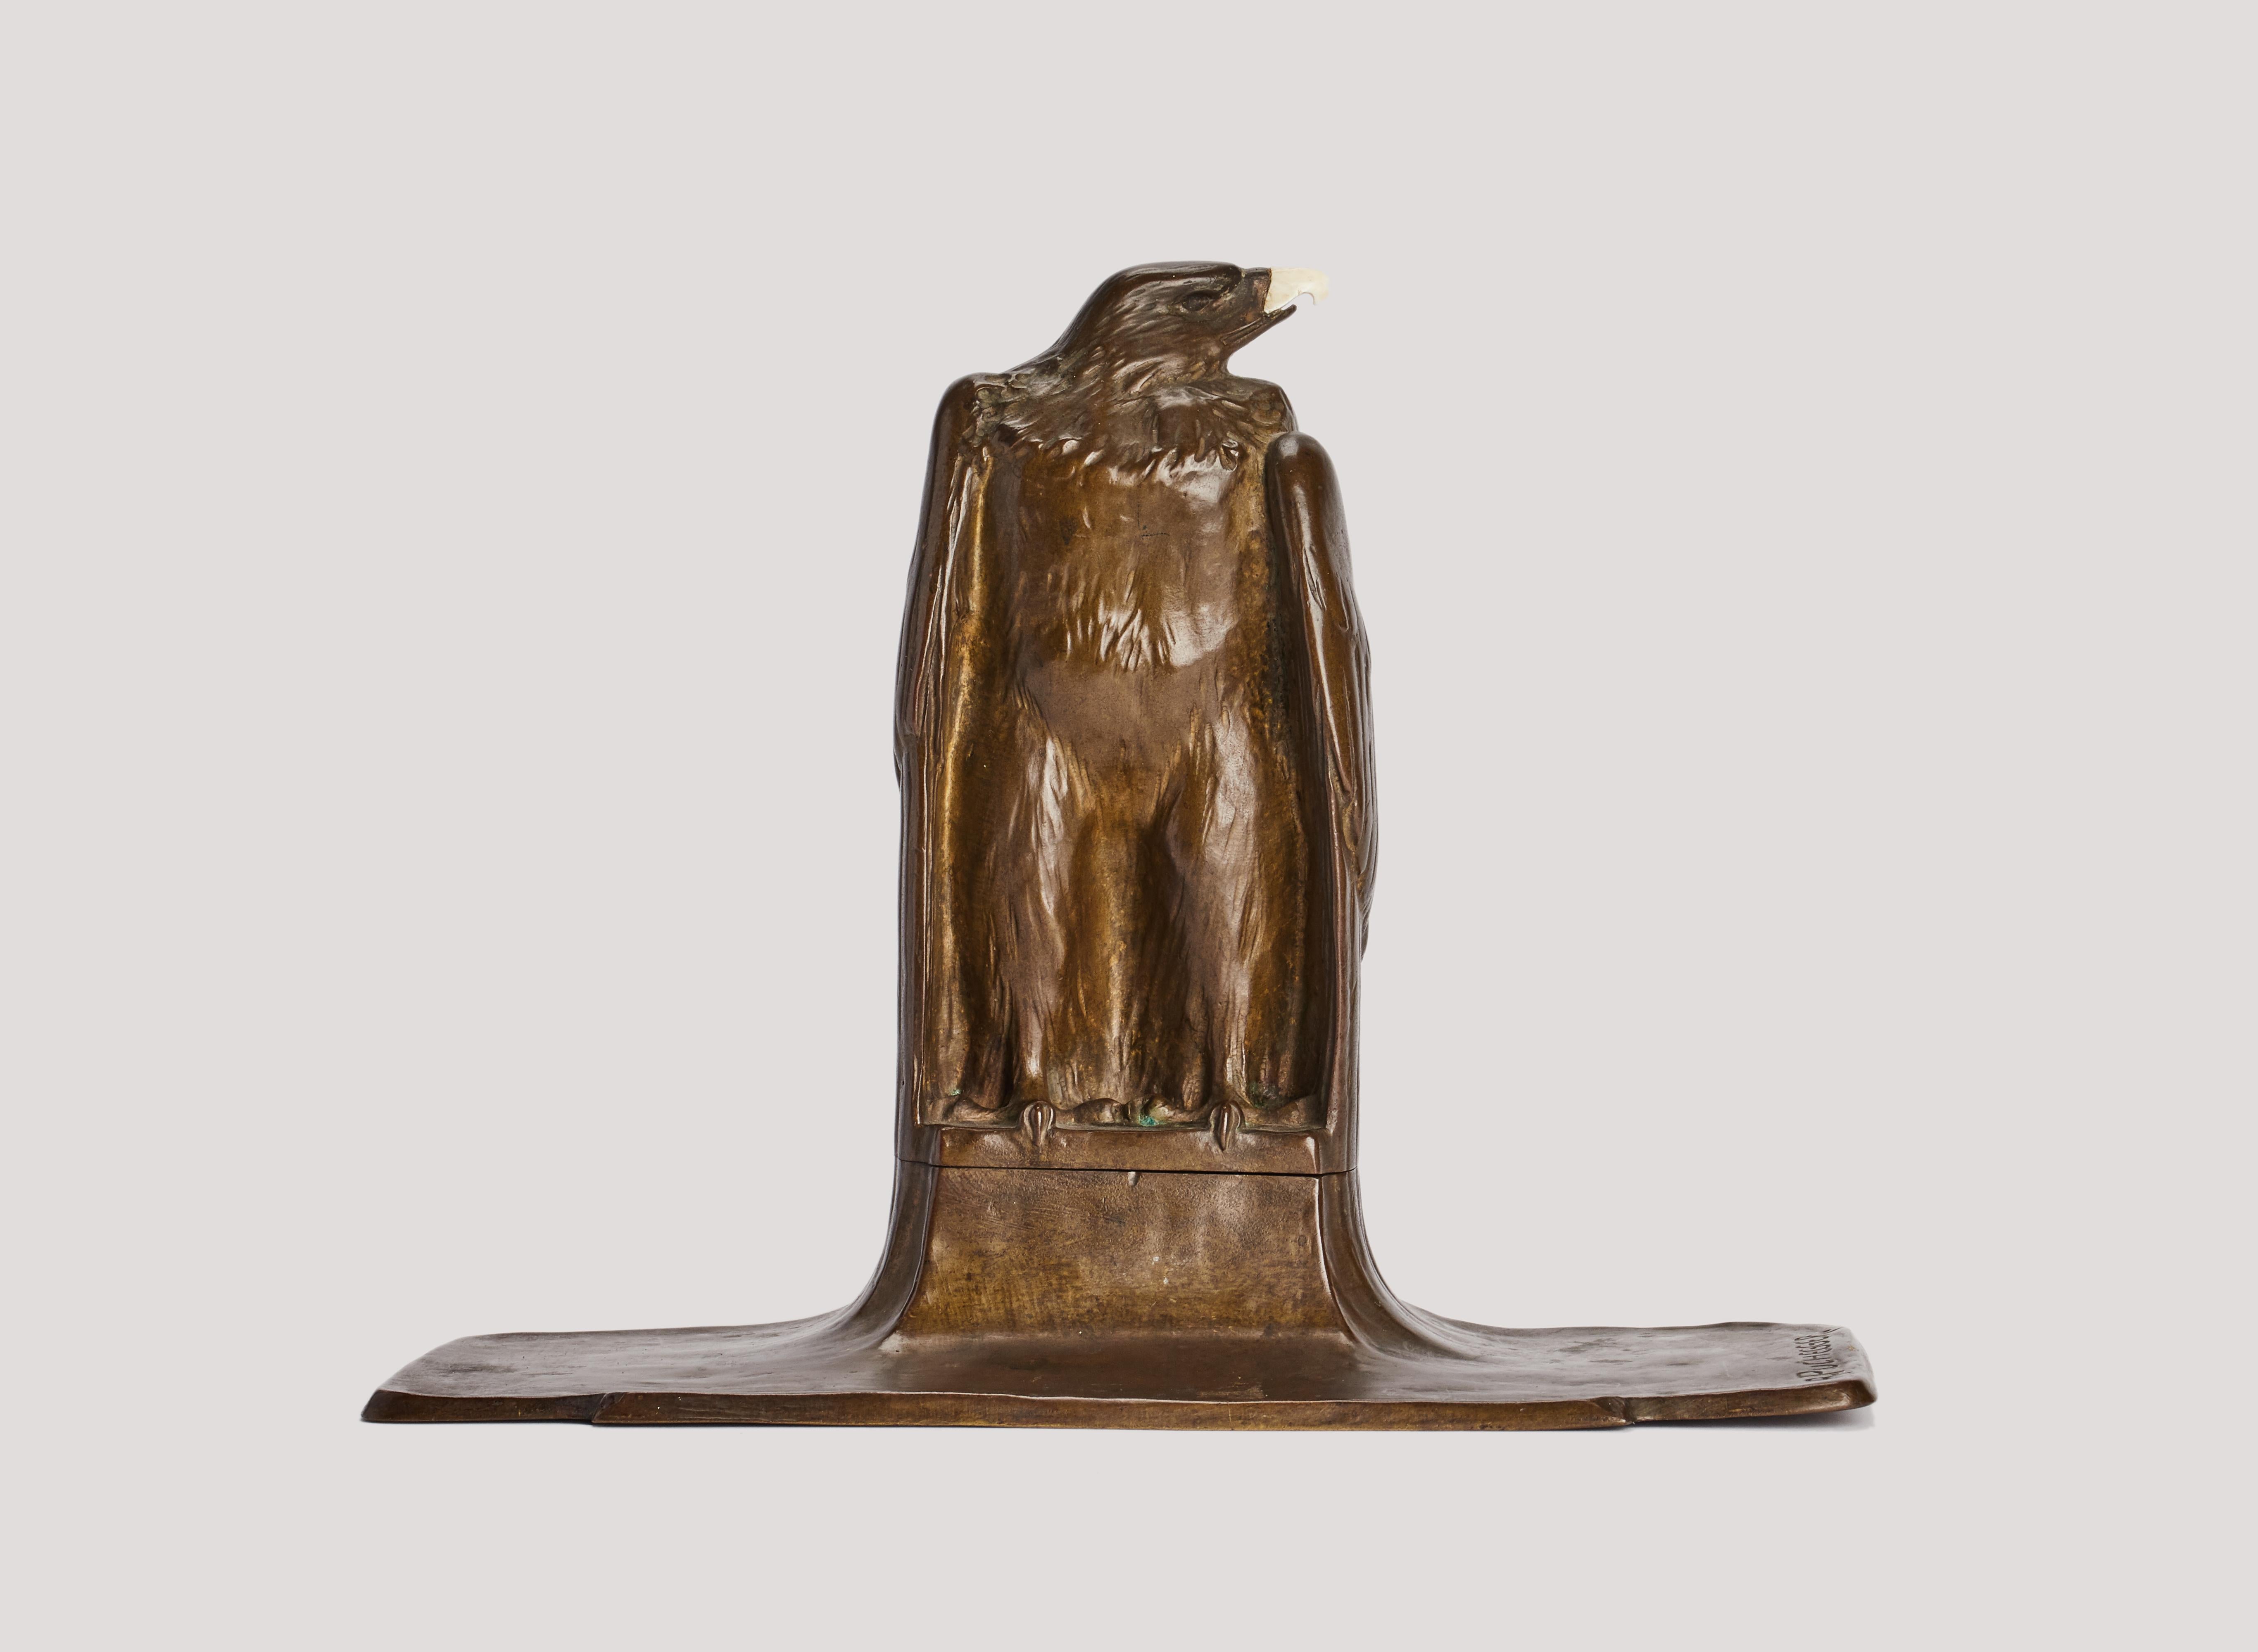 Eagle bronze inkwell. Over the rectangular base rise the sculpture which spins revealing the ink reservoir. Ivory beak. Signed A.Puchegger (1878 – 1917). Austria 1890 ca. (SHIP TO EU ONLY)